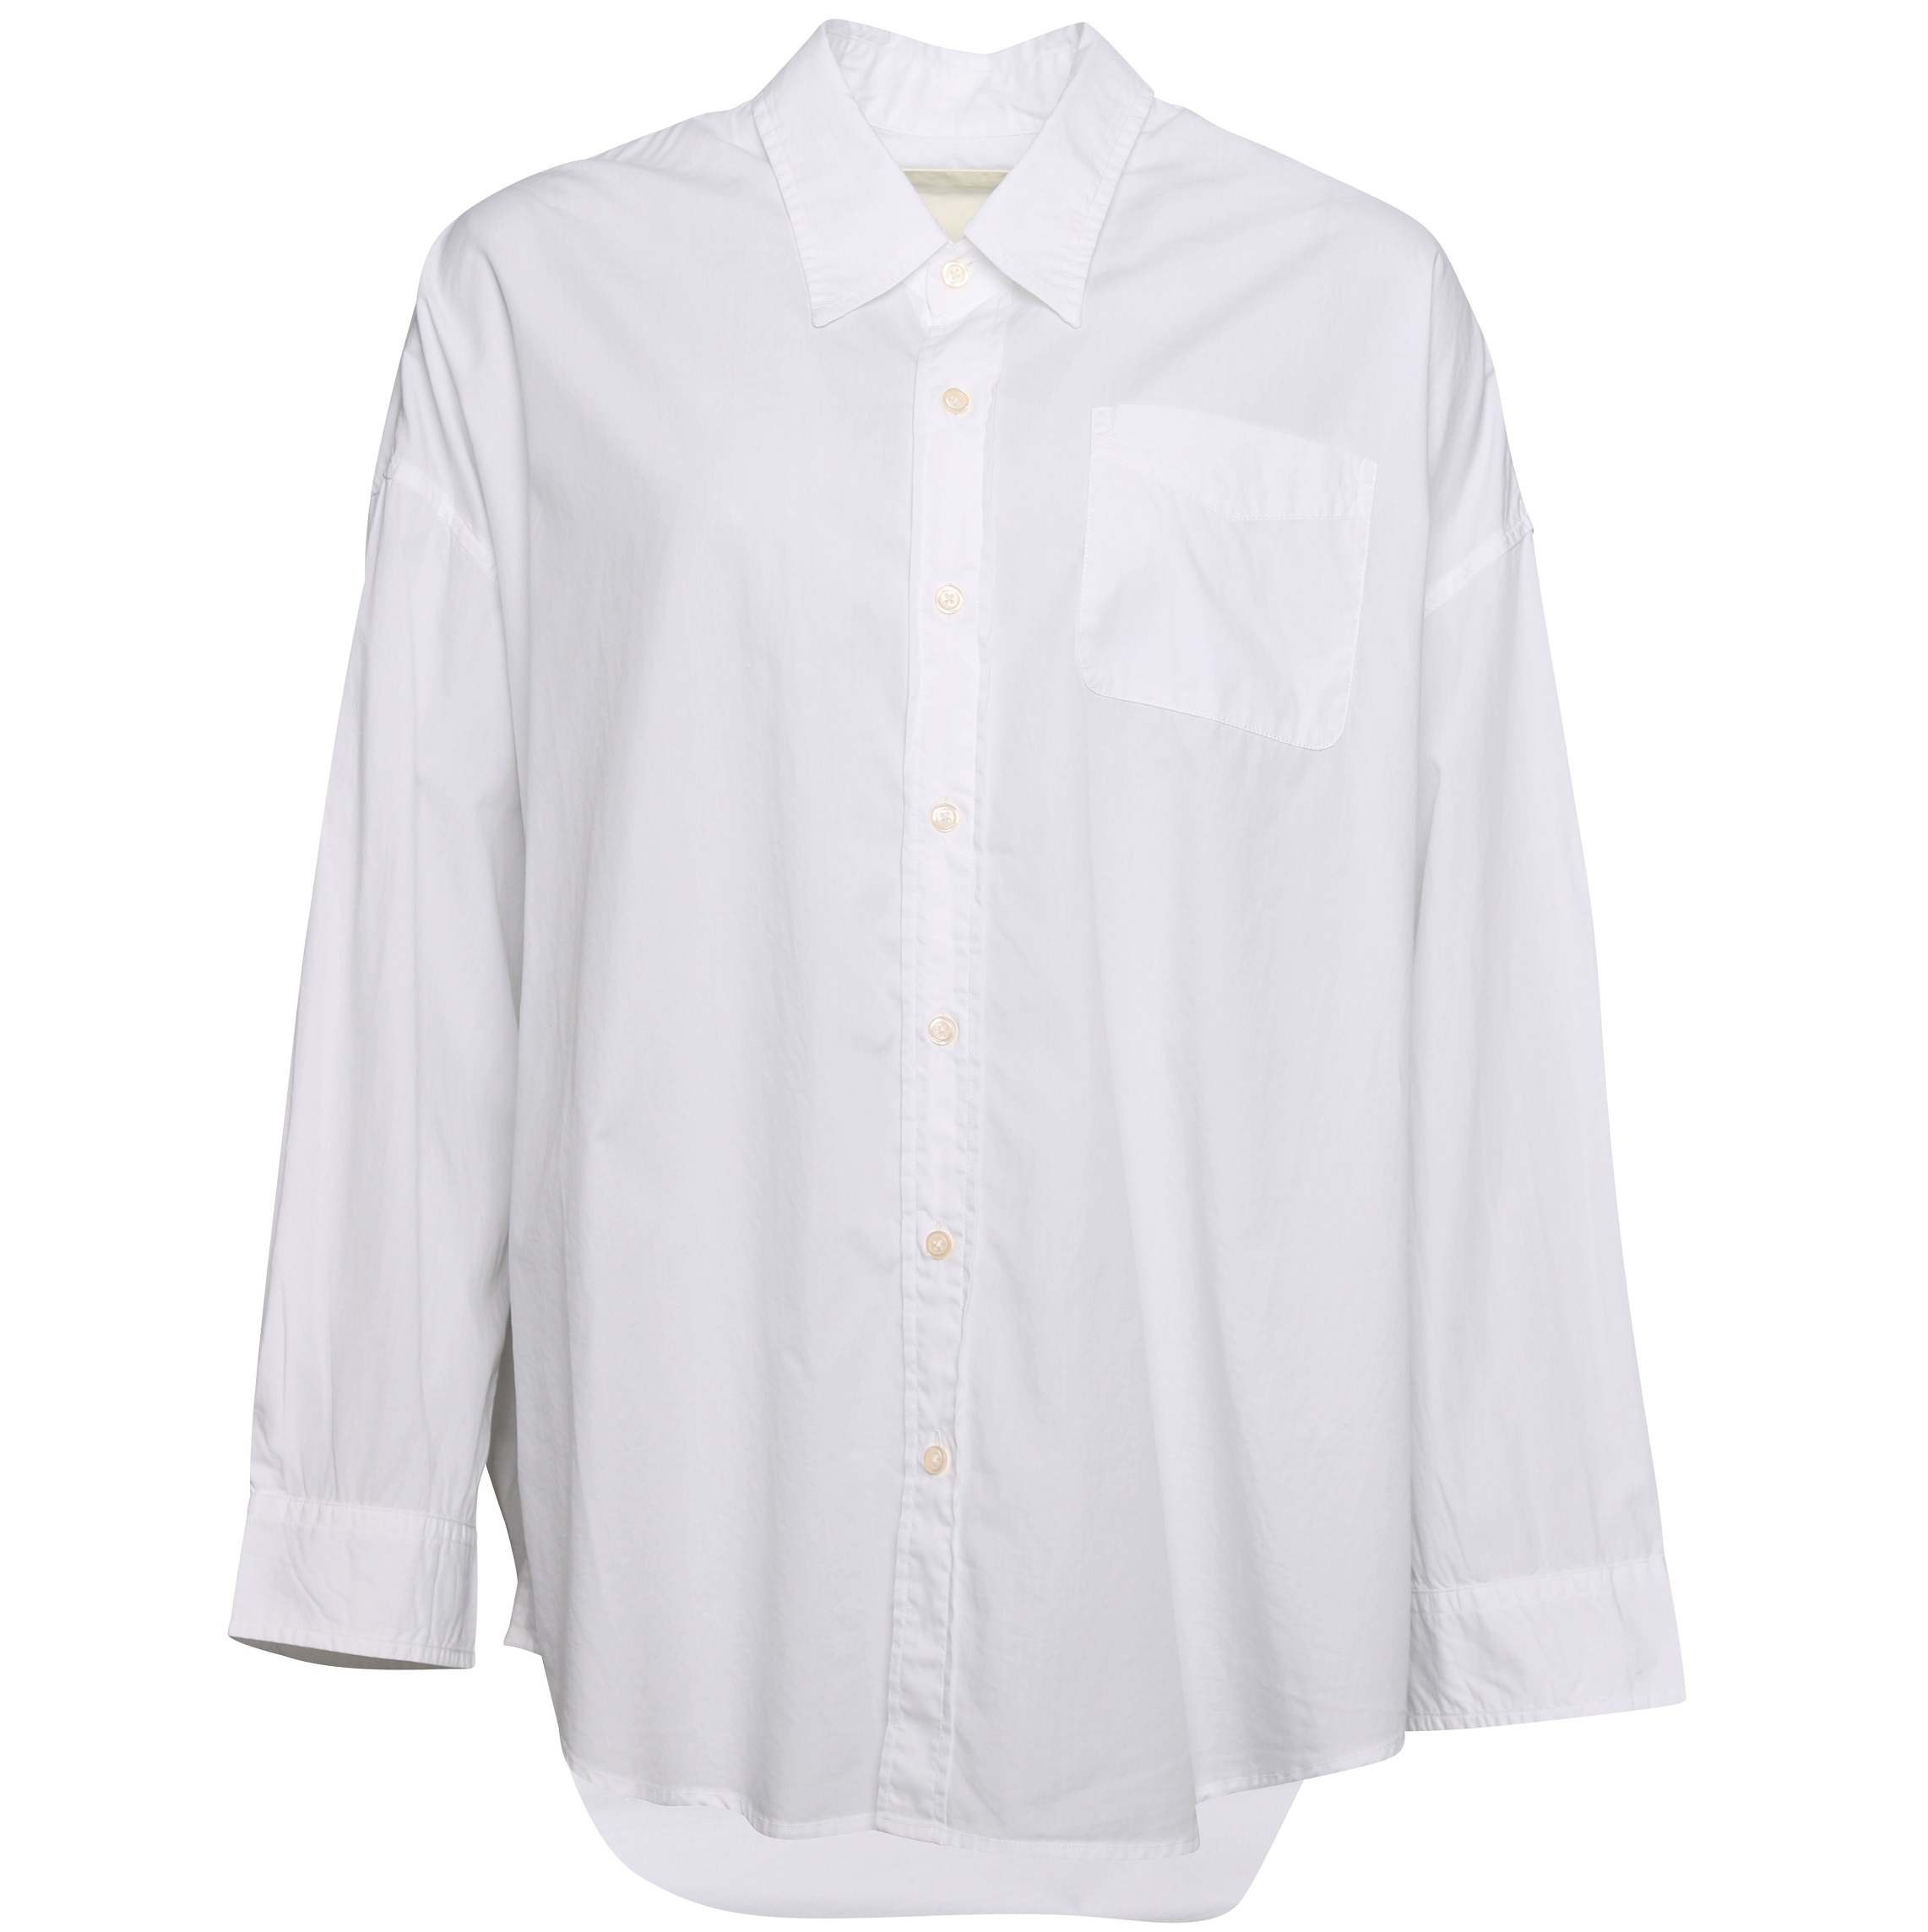 R13 Drop Neck Oxford Shirt in White